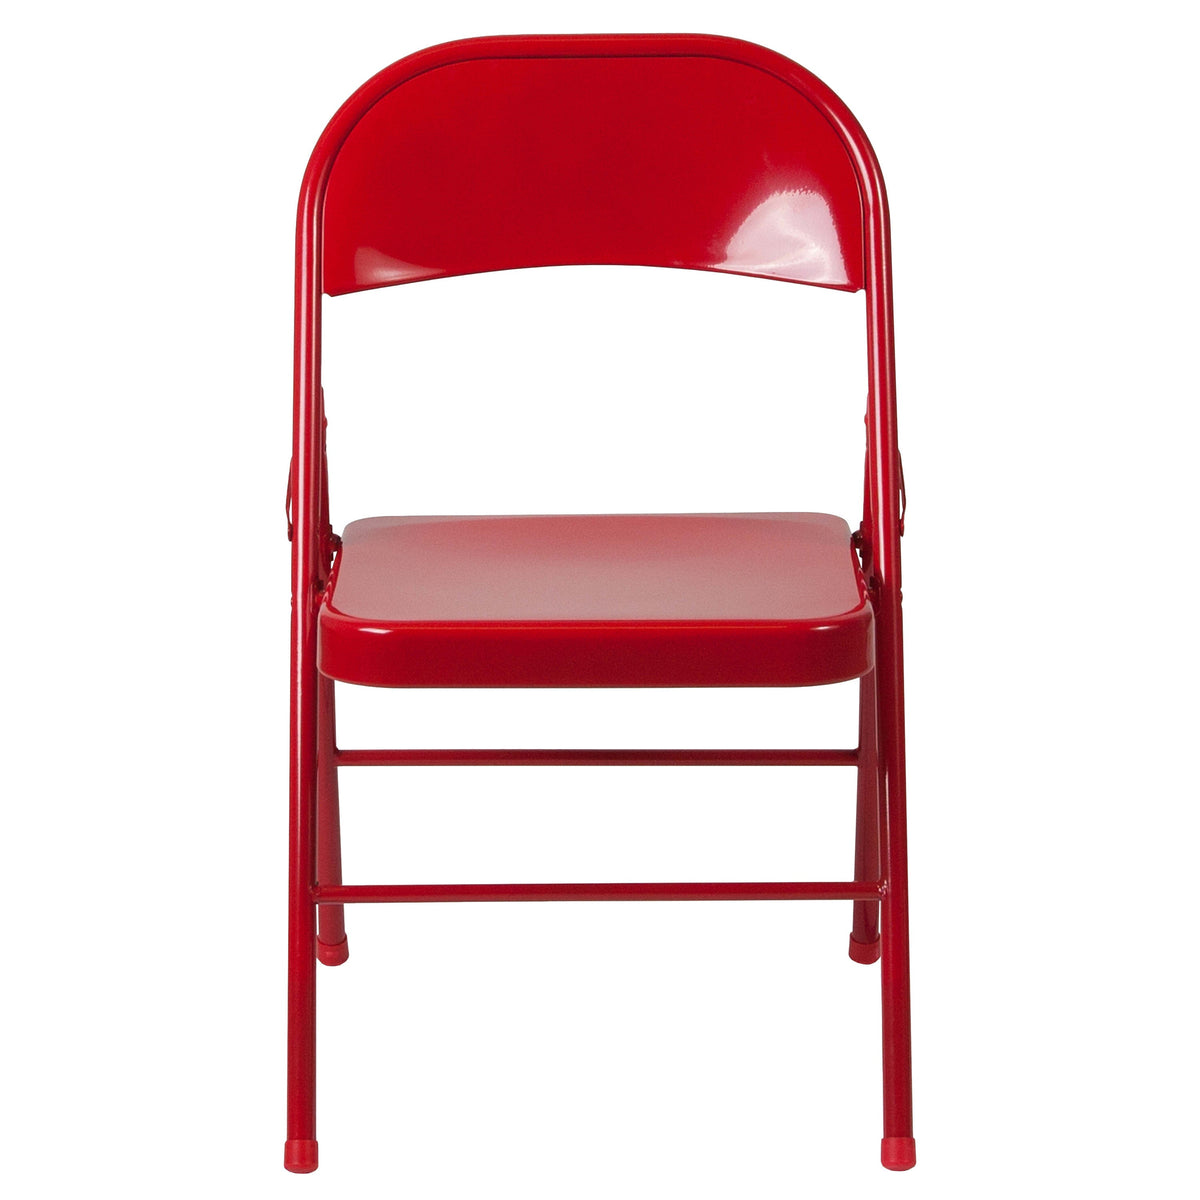 Red |#| Double Braced Red Metal Folding Chair - Event Chair - Portable Chair